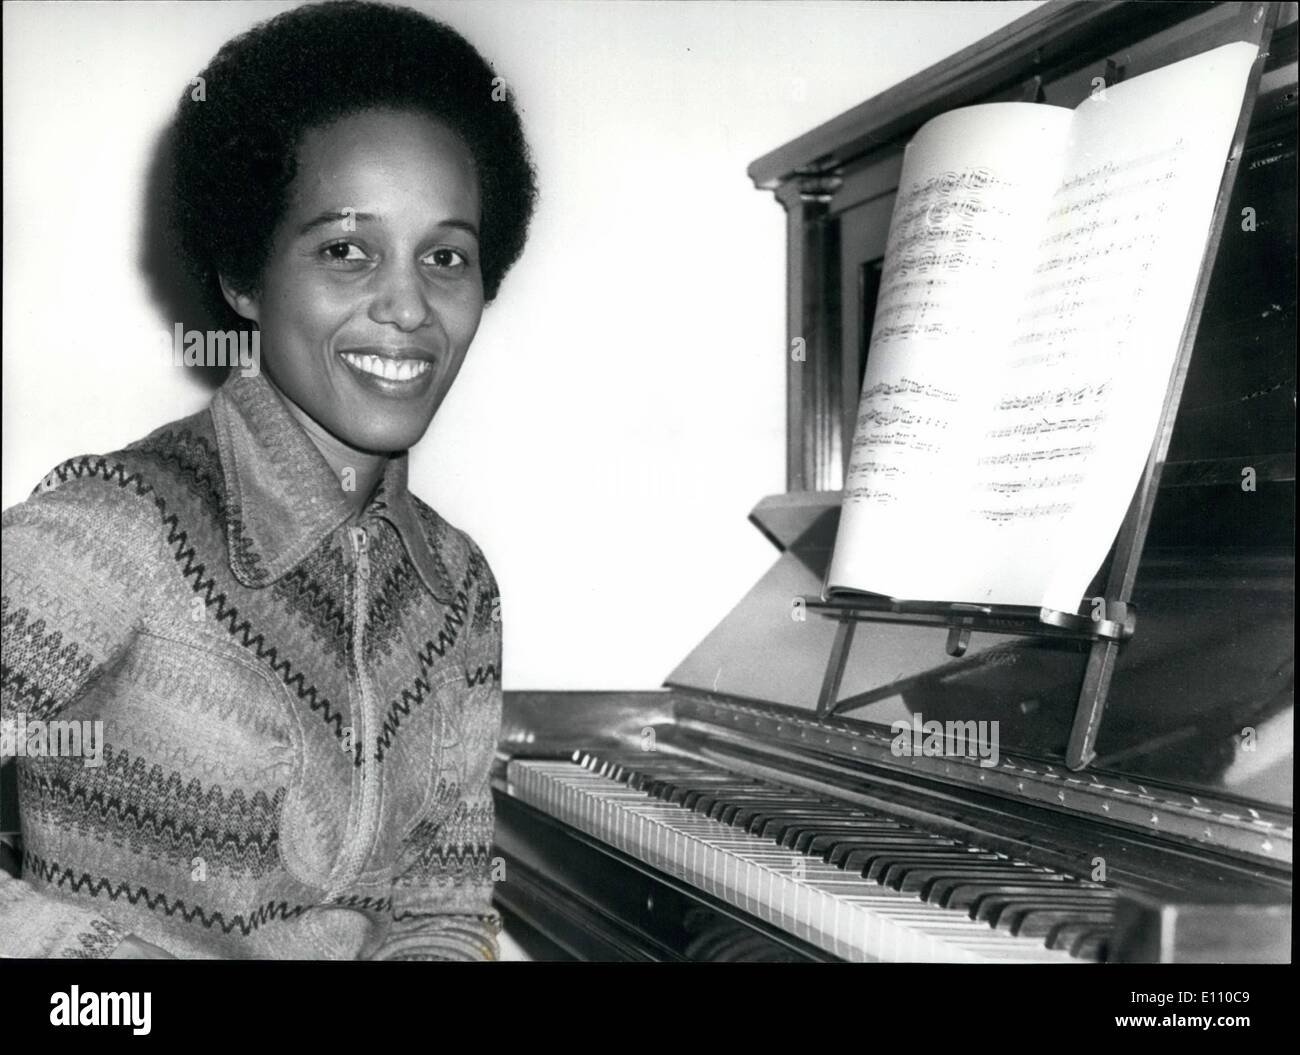 Feb. 02, 1975 - Nerine Barrett, Jamaican Born Pianist to Play Chopin Concerto at Royal Festival Hall. The Jamaican born pianist Stock Photo